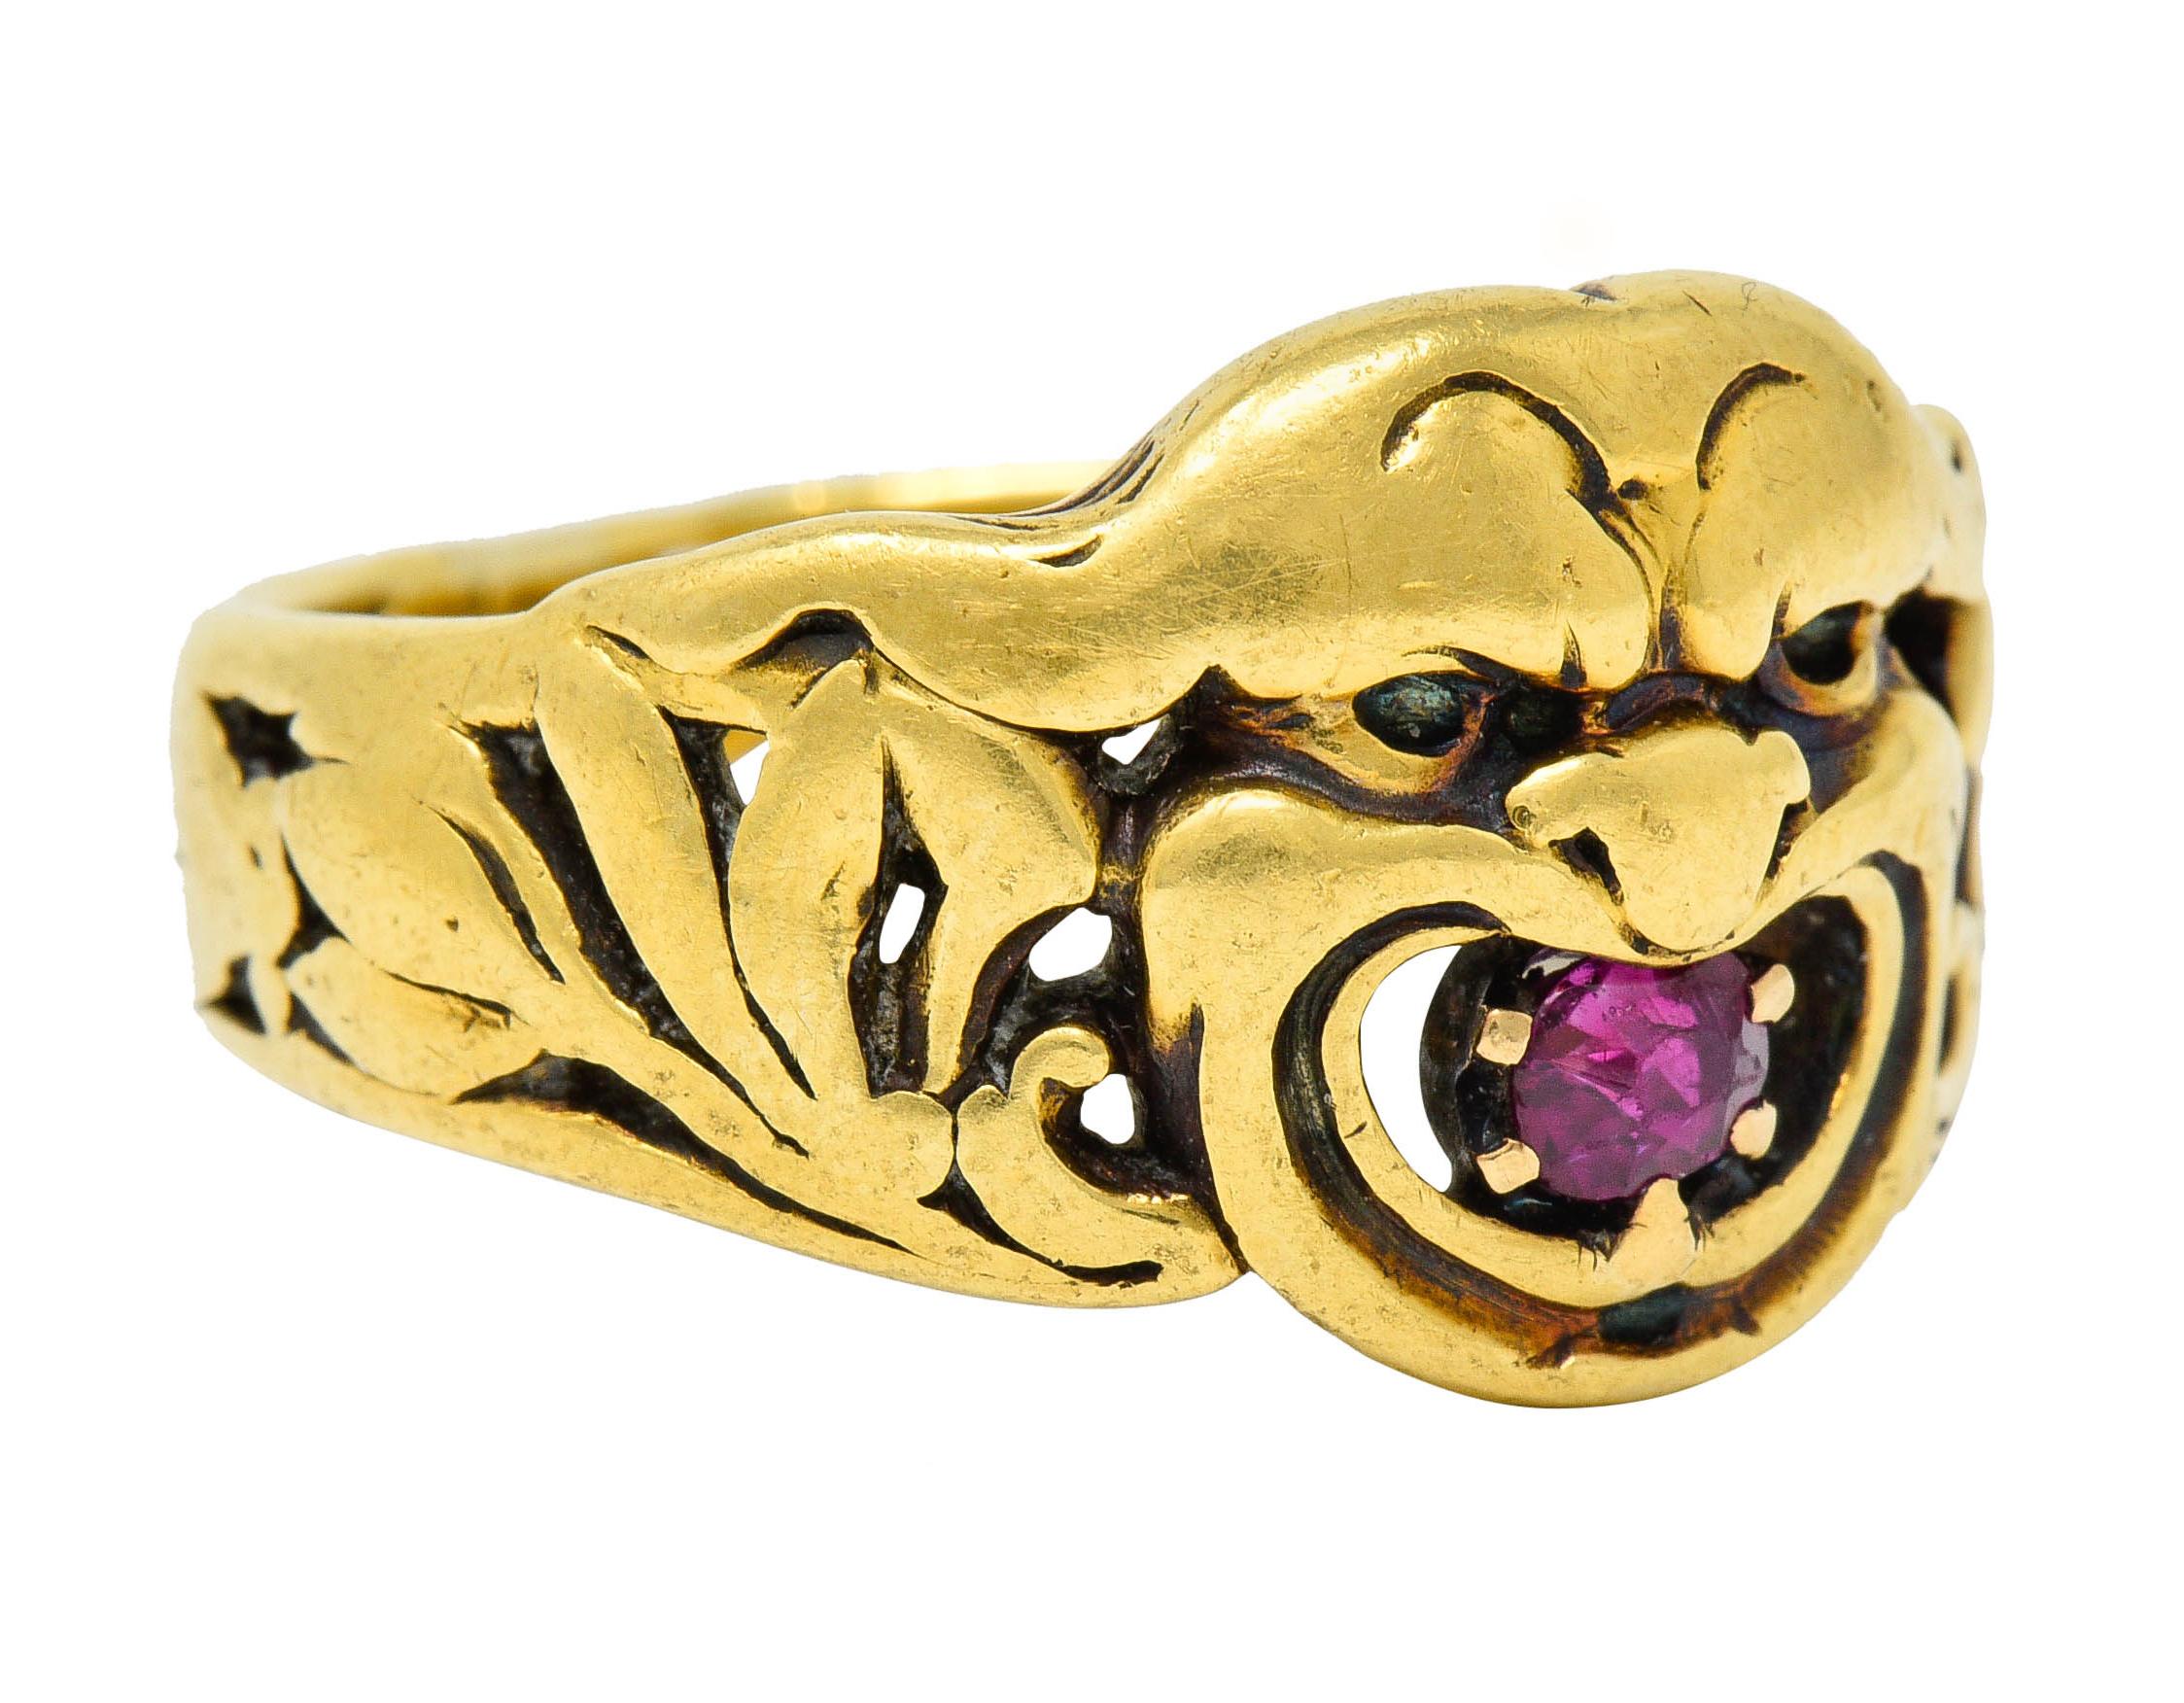 Band ring is deeply carved to depict a grimacing gargoyle face

Centering a rectangular cushion cut ruby weighing approximately 0.24 carat; bright purplish-red

Completed by pierced shoulders designed with flourishing foliate

Tested as 18 karat